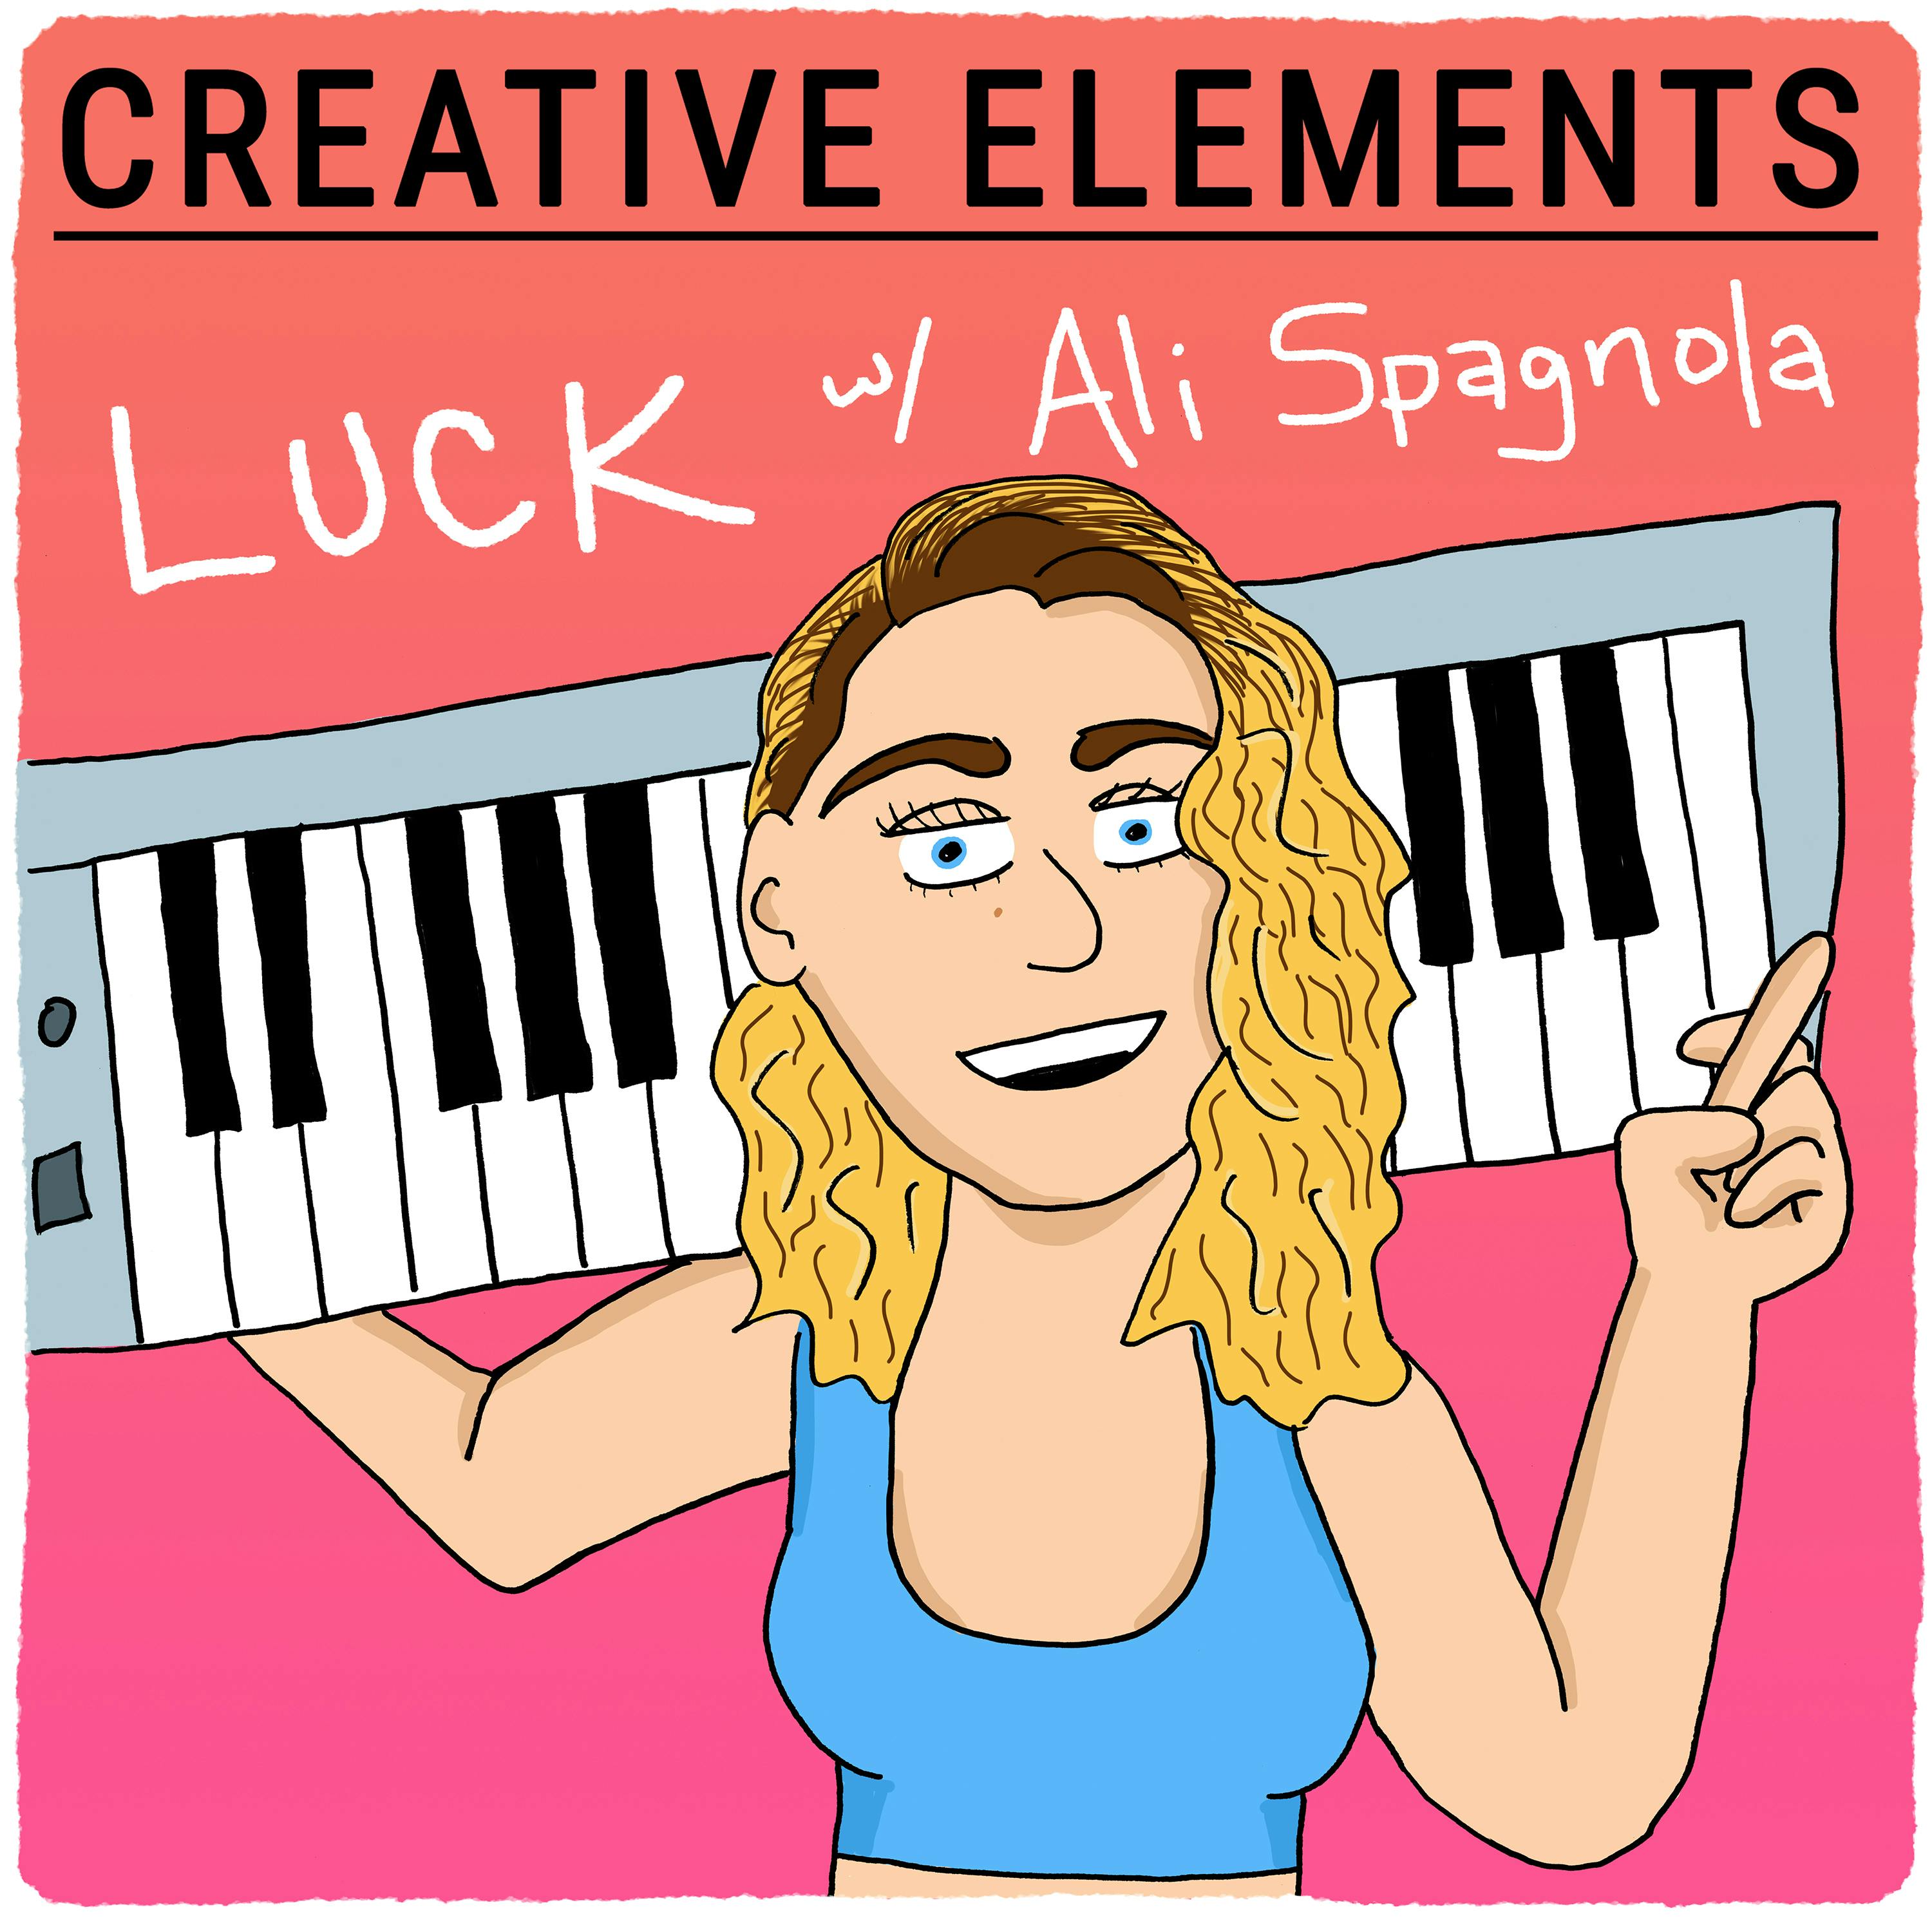 #75: Ali Spagnola [Luck] – Making outrageous music and videos while trying to befriend the algorithm